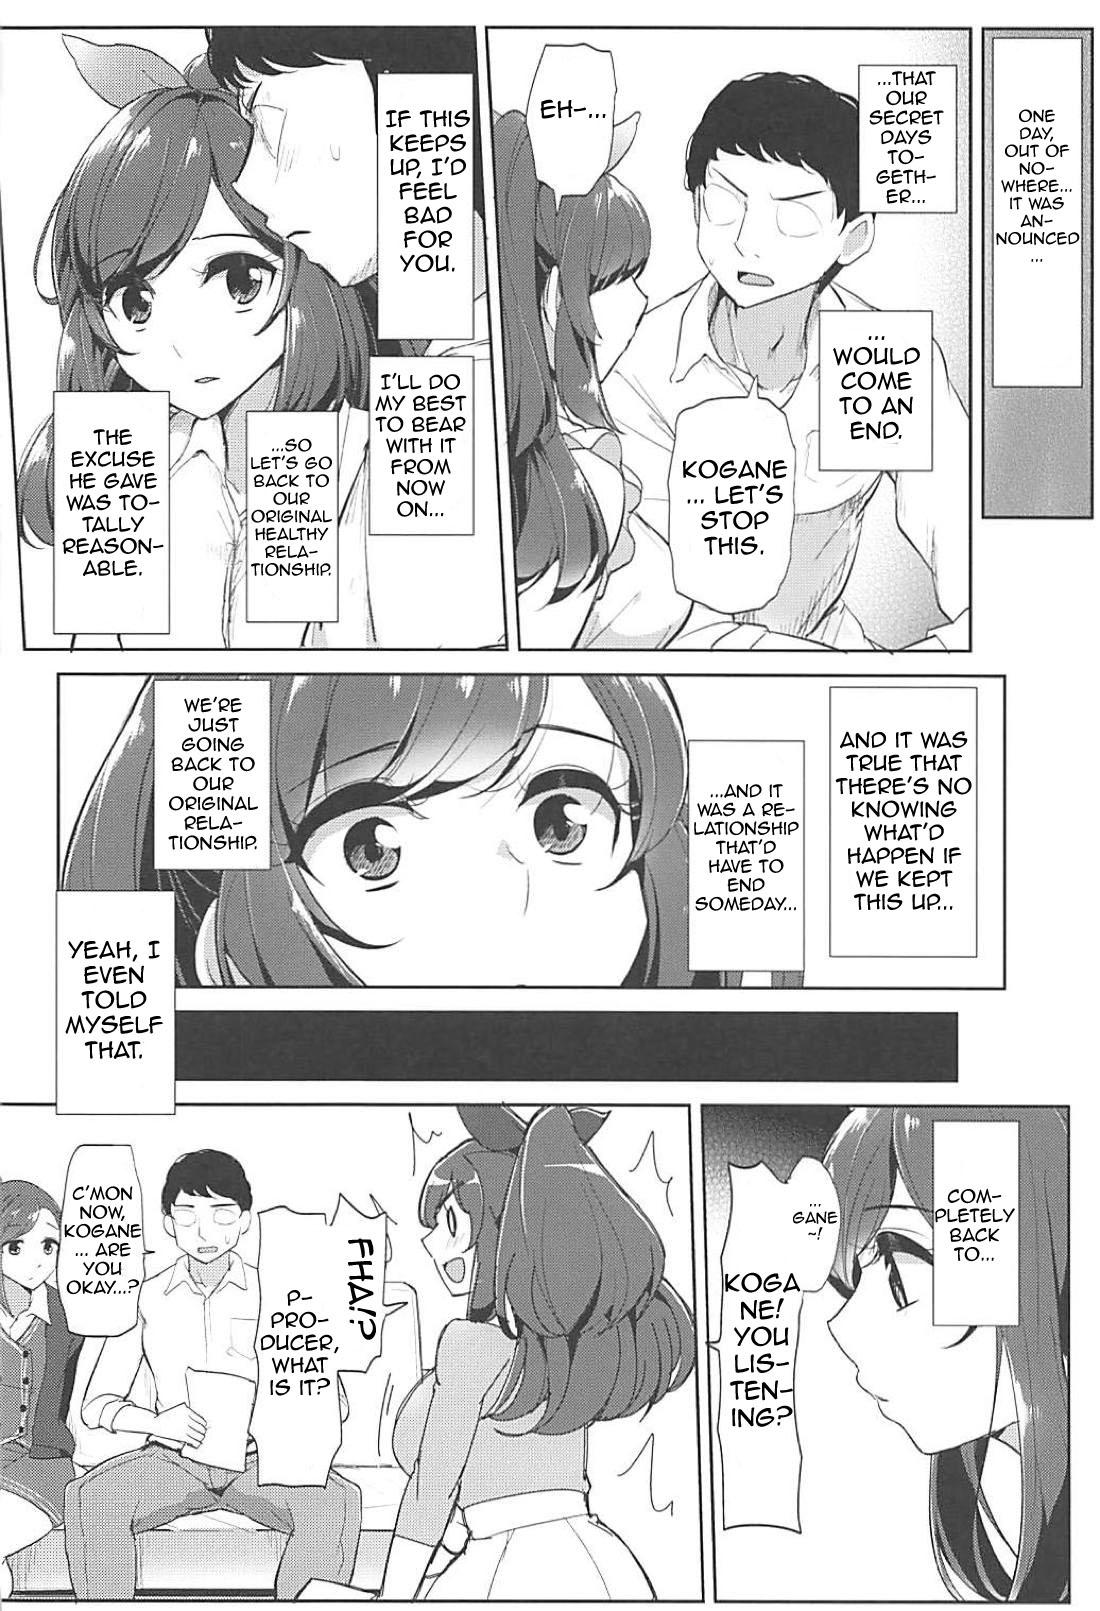 Groupfuck P e no Suki wa Tomeraren bai - When I Just Can't Stop Loving The Producer - The idolmaster One - Page 8